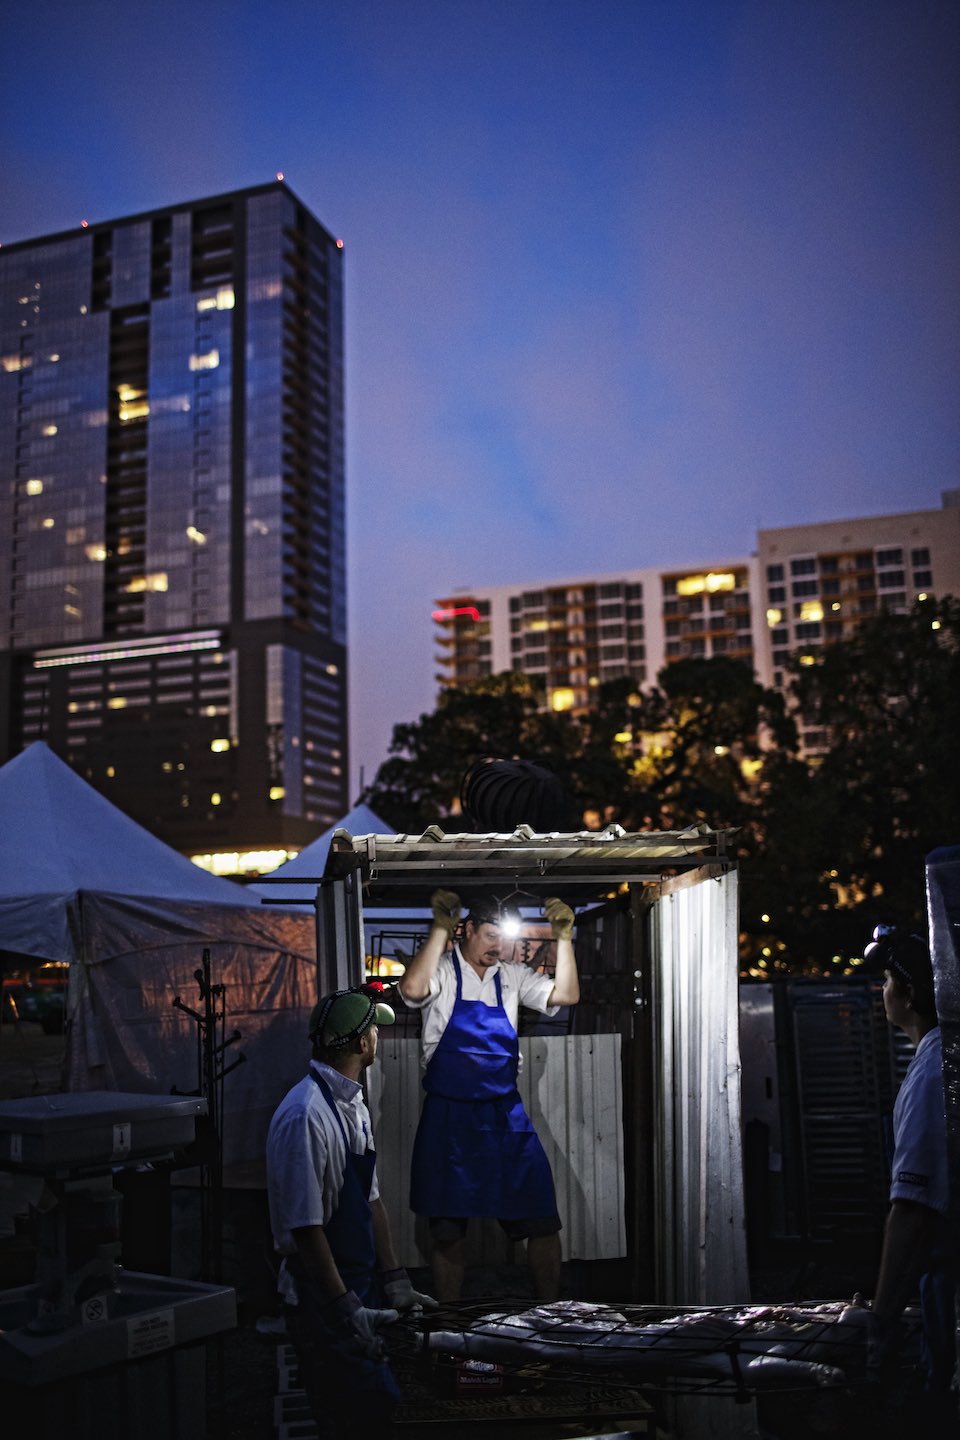 Jody Horton Photography - Chef Tim Byres preparing the pig for the roast, with the Austin skyline in the background.